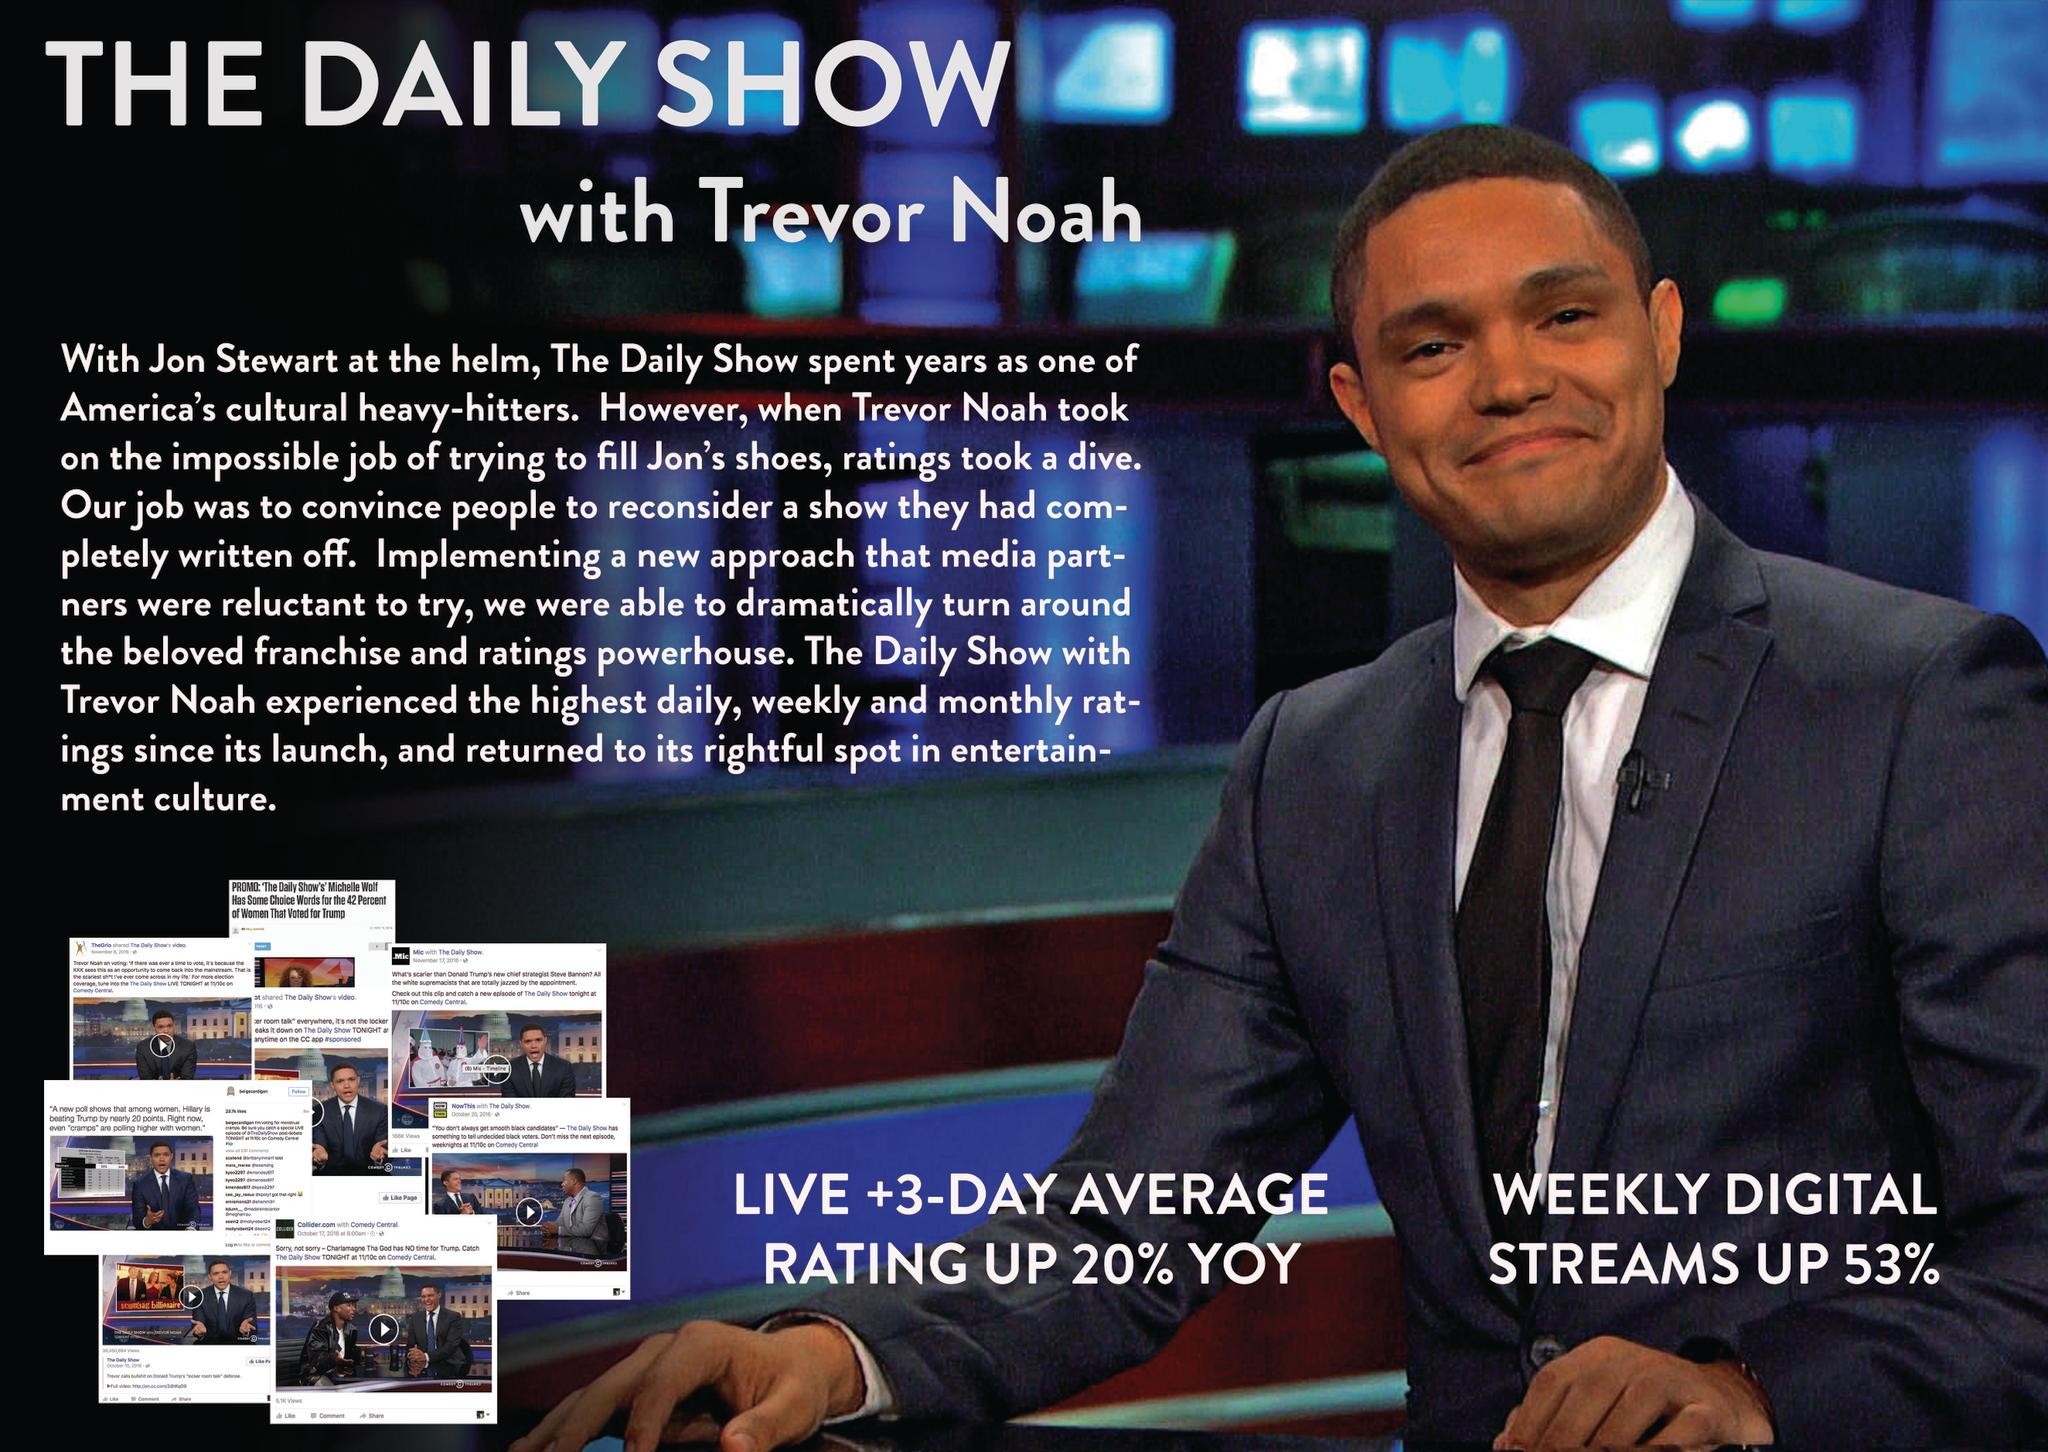 The Daily Show, Fall 2016 Election Campaign